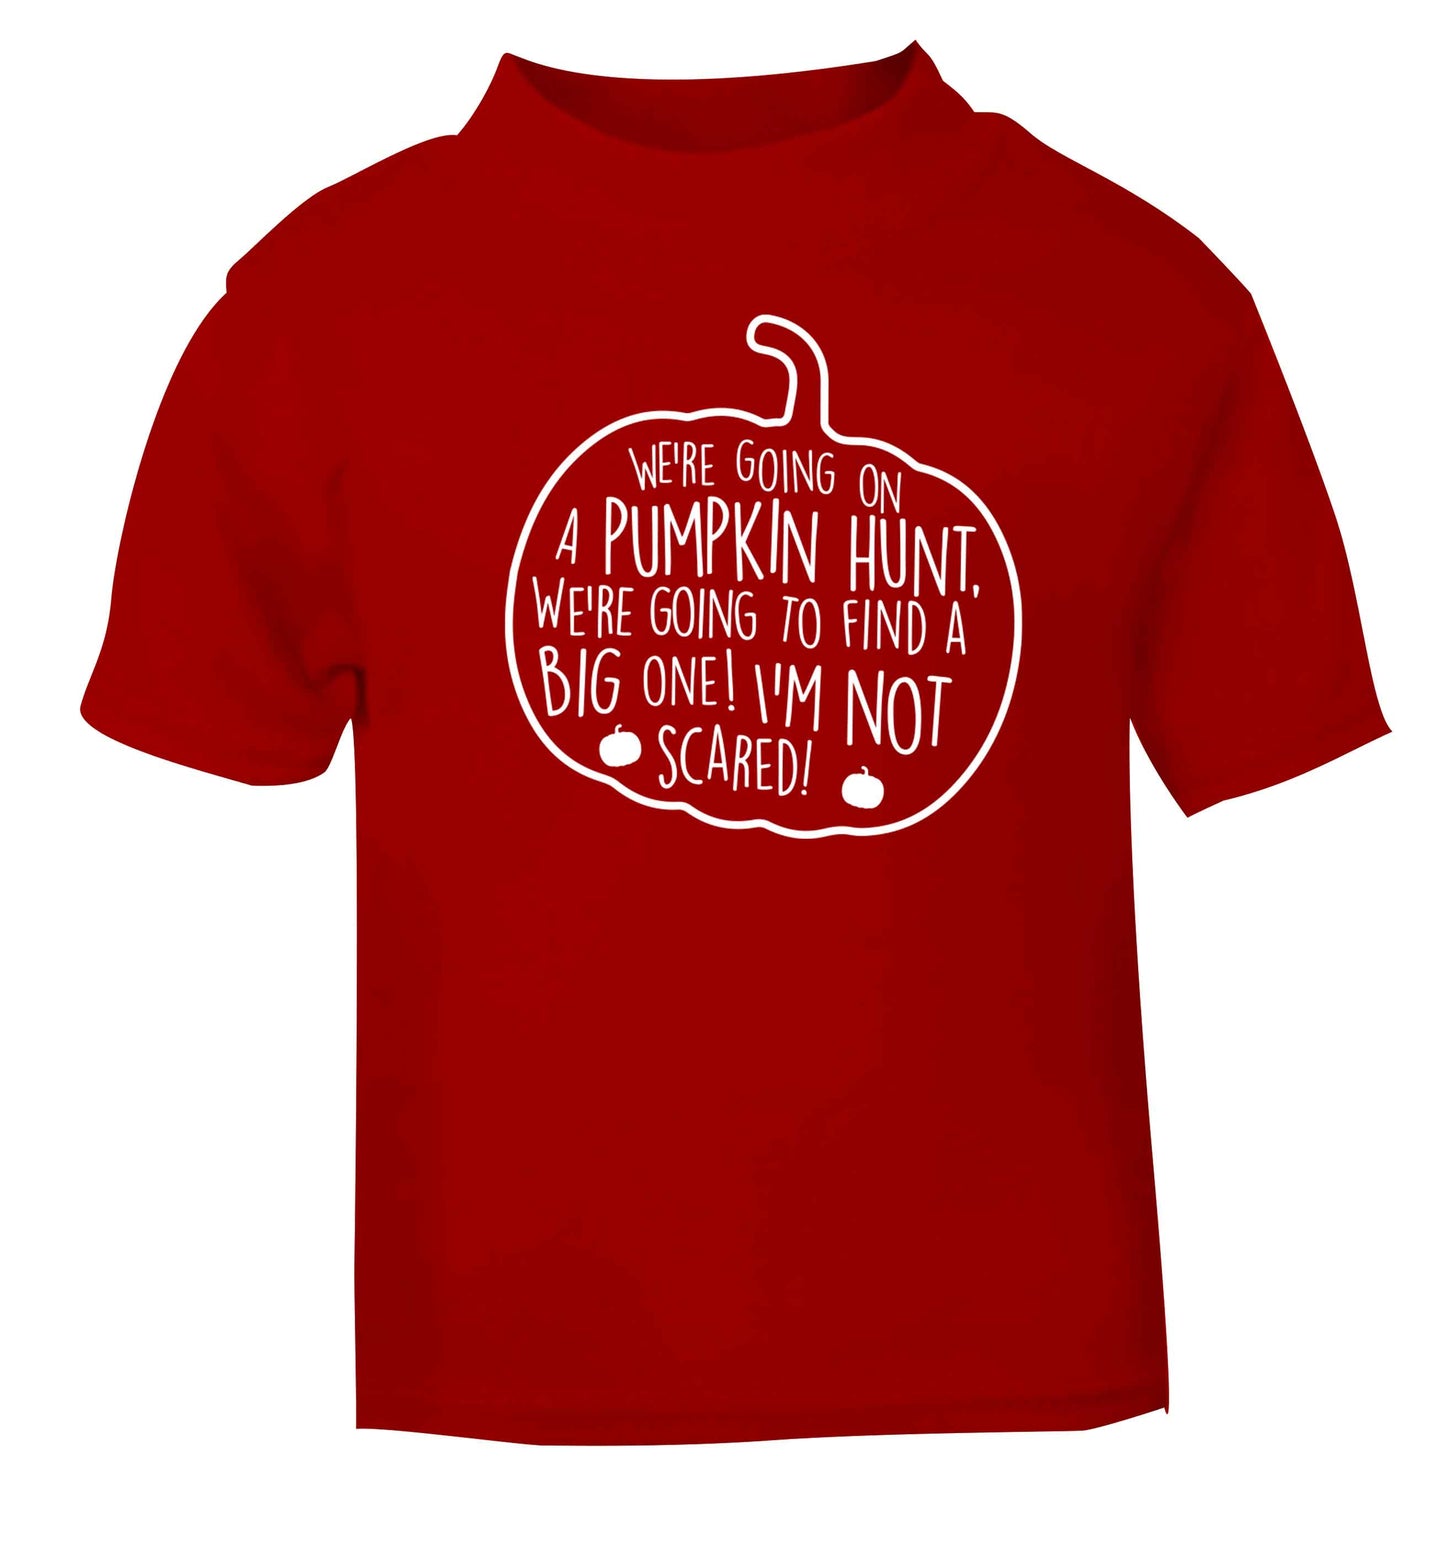 We're going on a pumpkin hunt red baby toddler Tshirt 2 Years